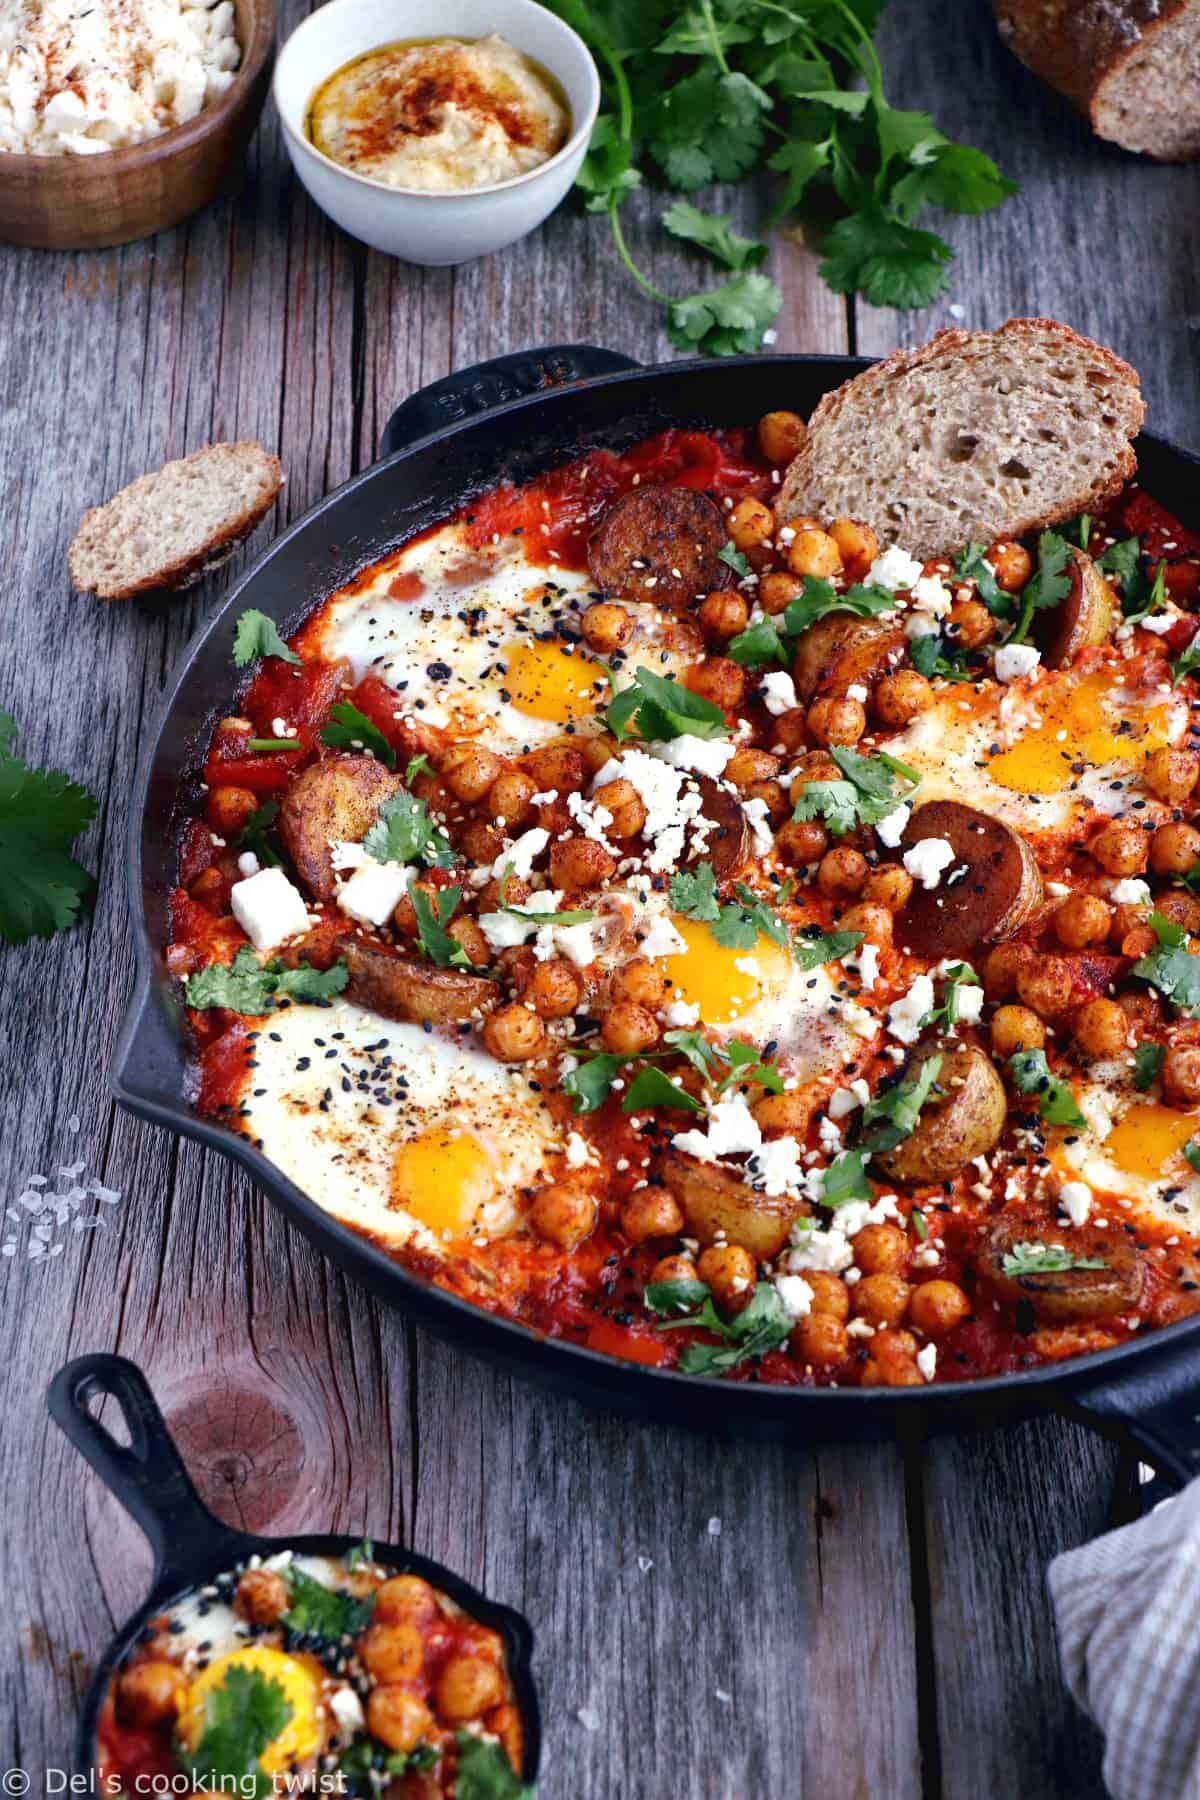 Take the shakshuka to the next level with this deluxe shakshuka recipe, featuring the classic baked eggs and tomatoes with an extra kick of spicy roasted potatoes and chickpeas.